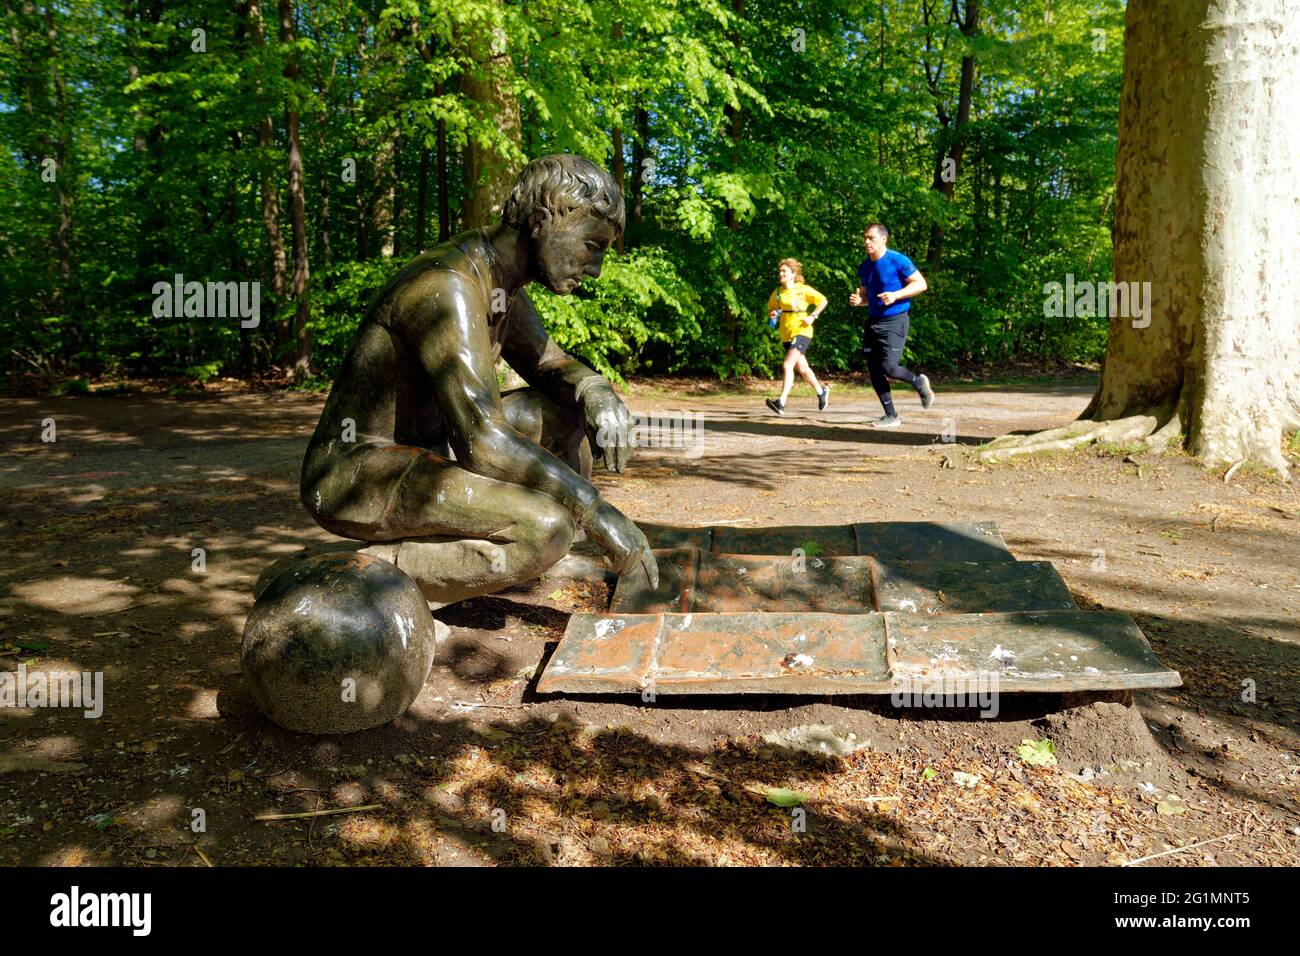 France, Bas Rhin, Strasbourg, La Roberstau district, Pourtales Castle park, the Sculpture Park, Genius Loci (The Spirit of Places) by Giulio Paolini (2001), The figure crouching beside a sphere is scrutinizing a map lying on the ground Stock Photo